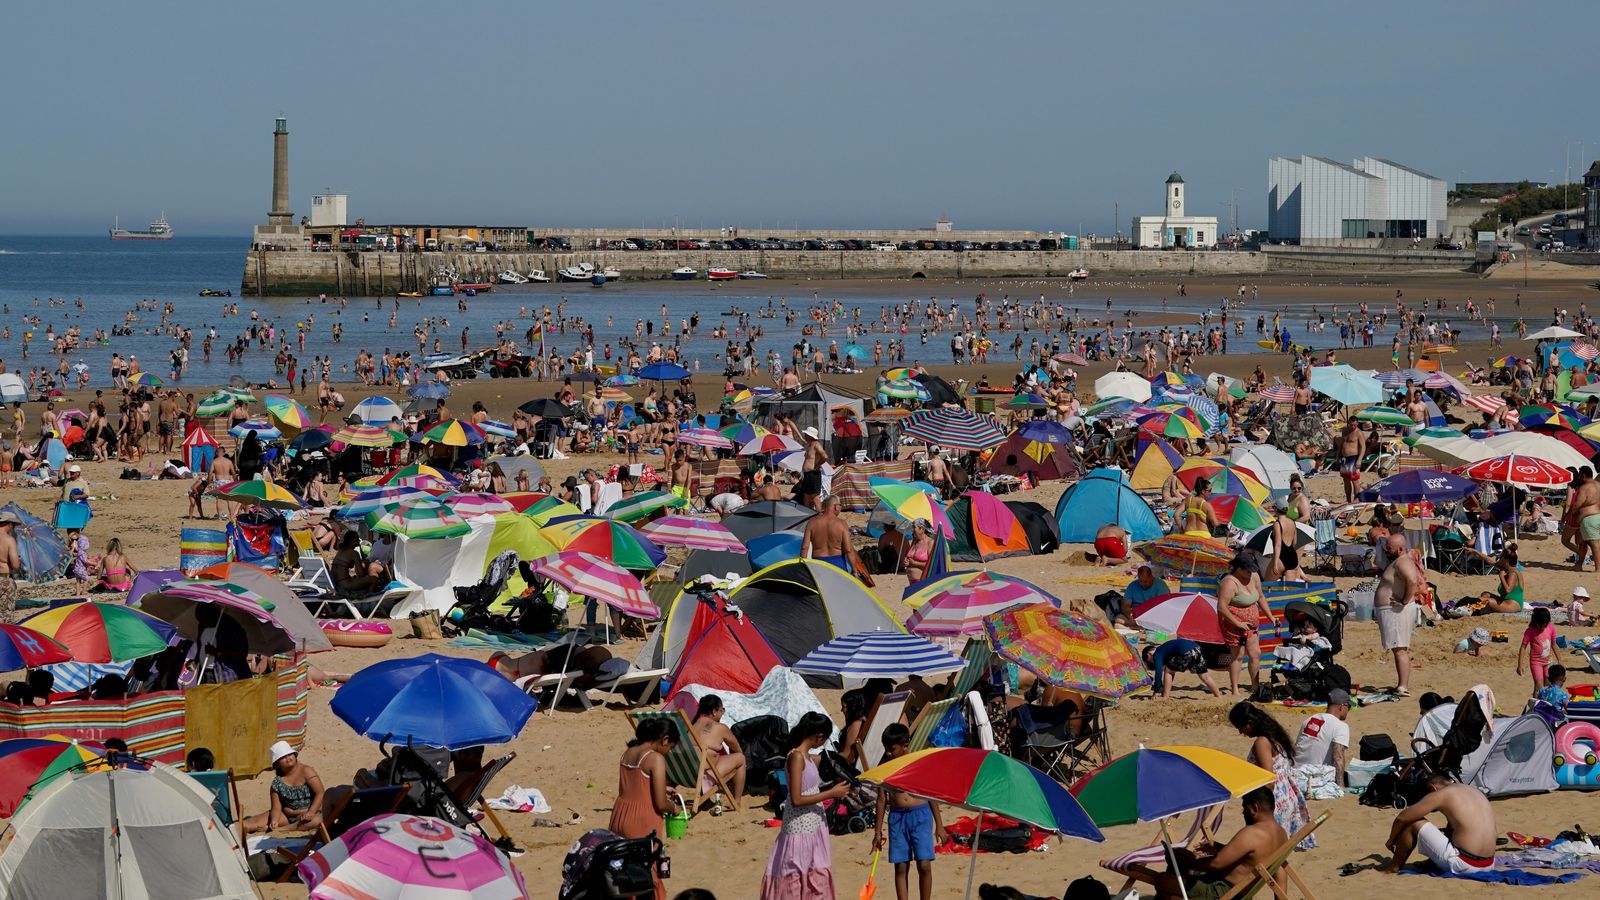 UK weather: Beaches packed as seventh day of 'unprecedented' heatwave hits Kent coast